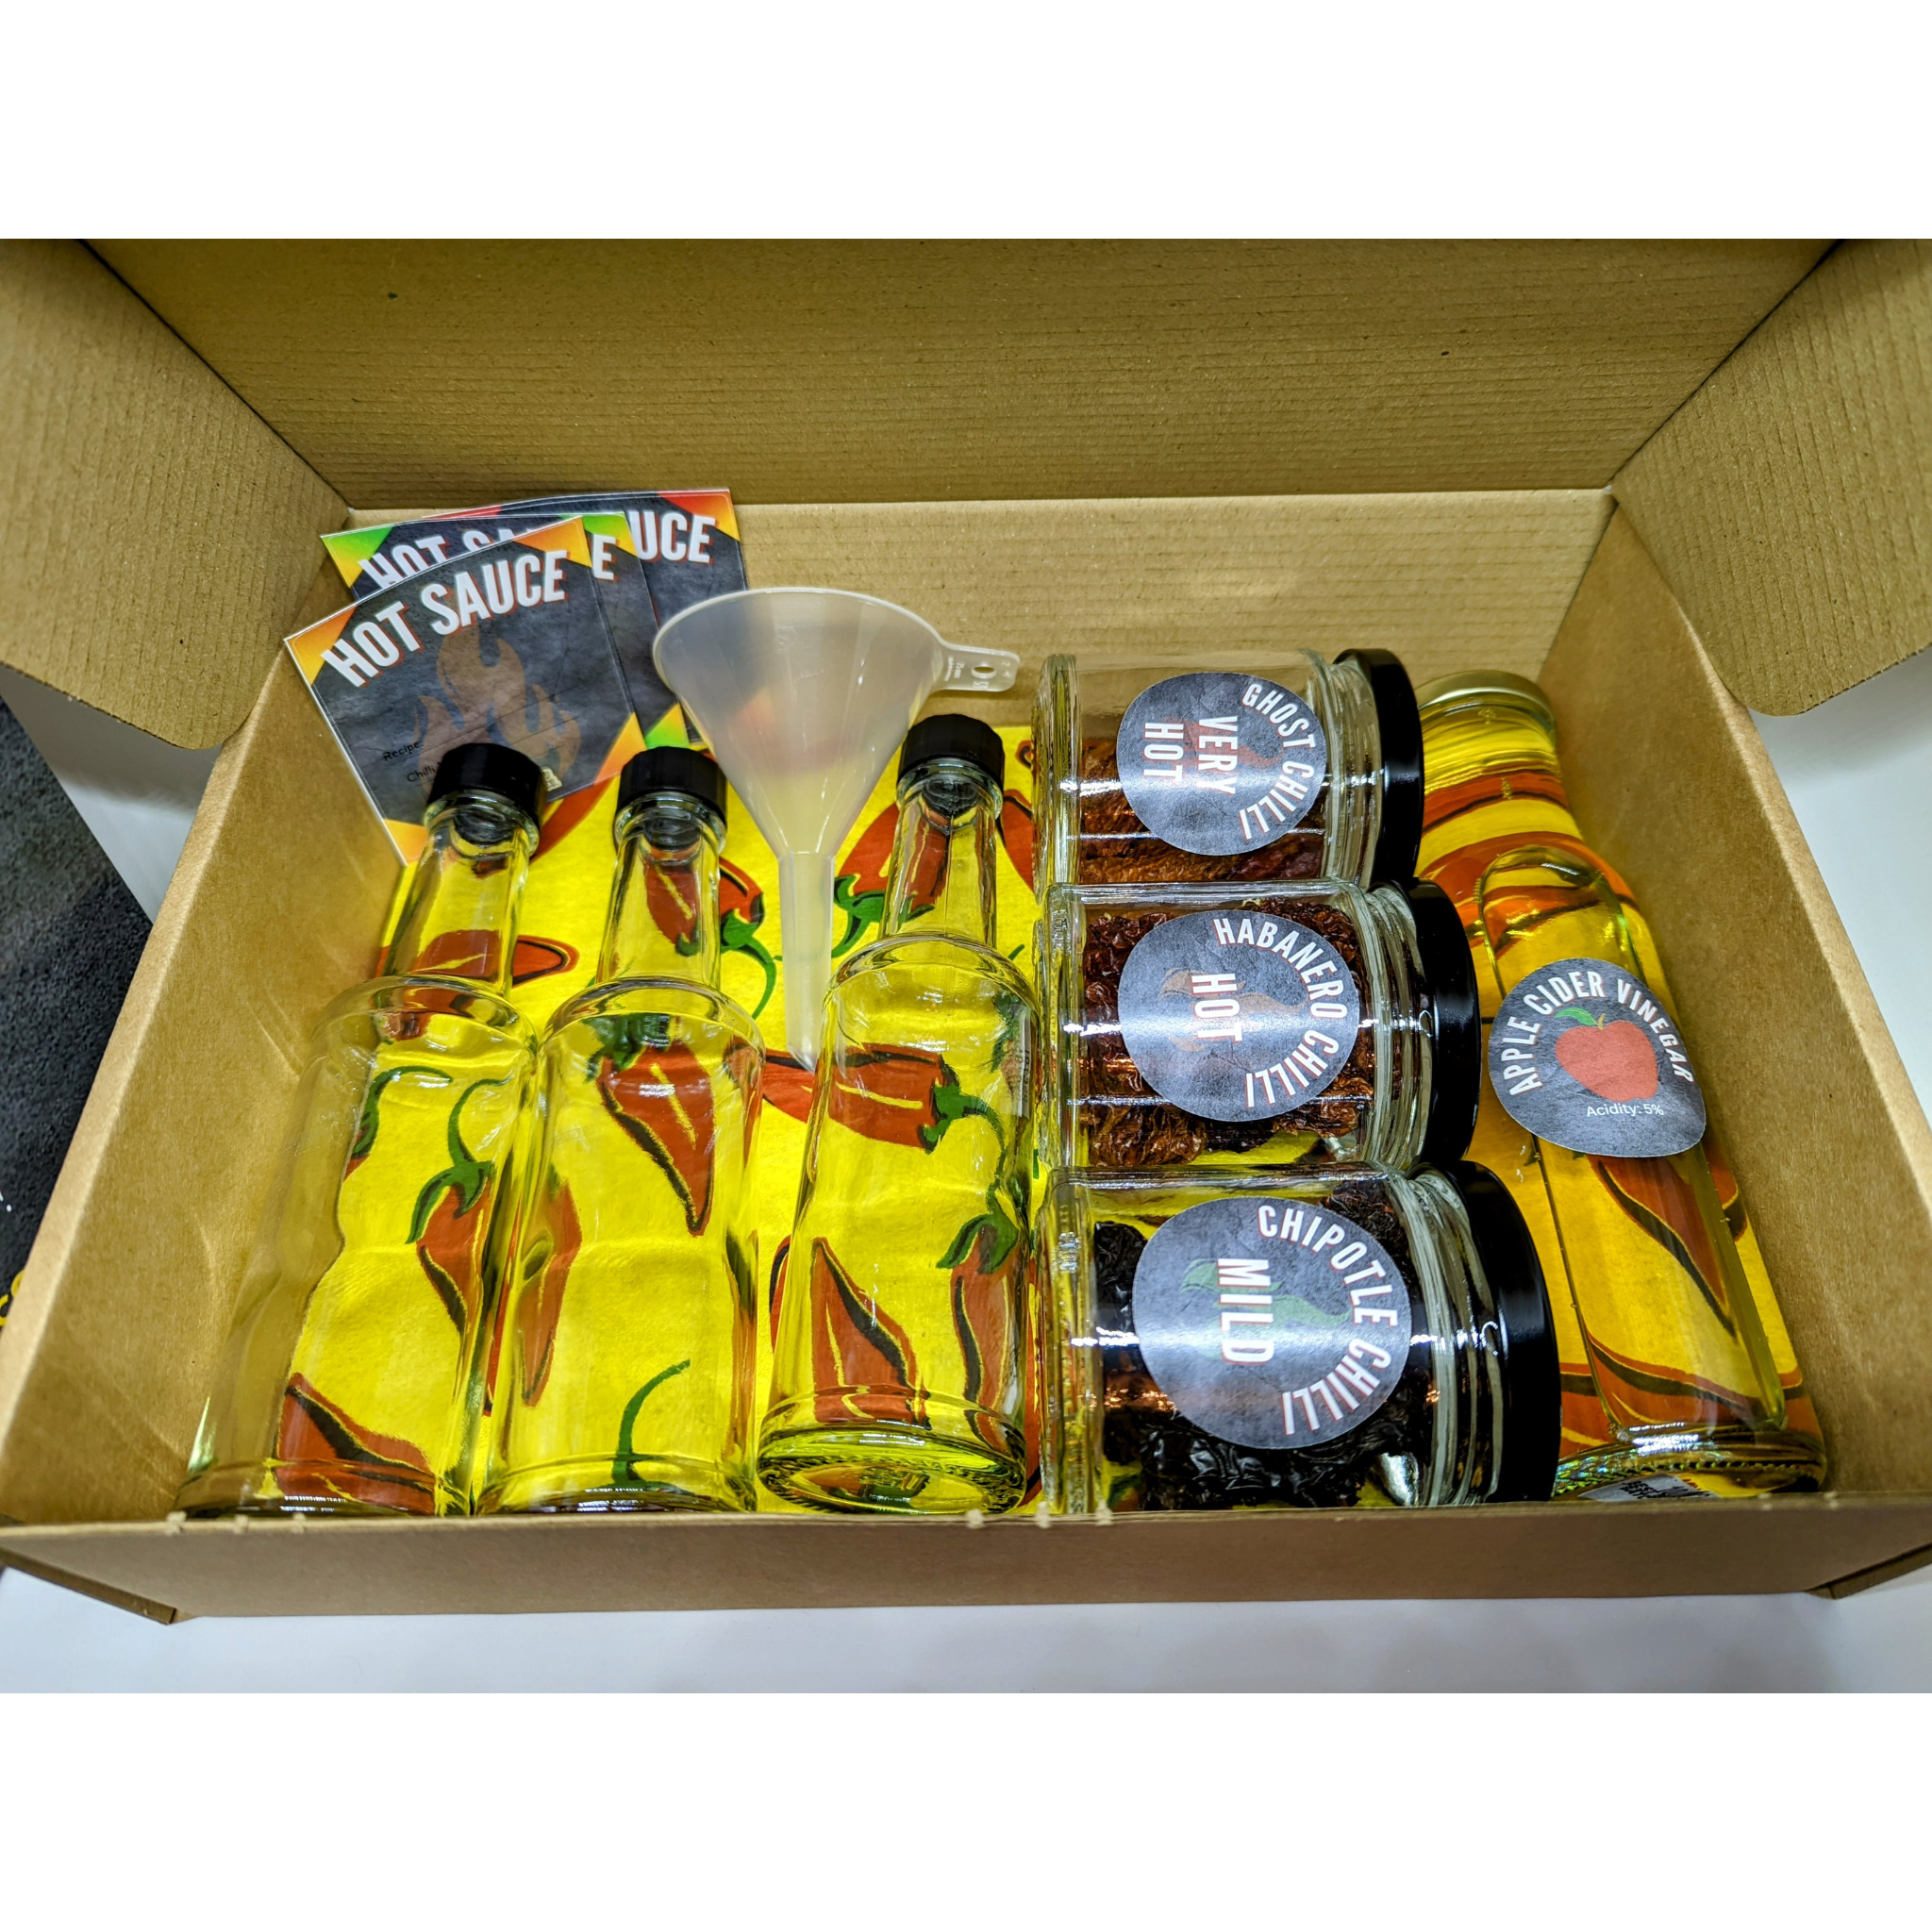 Hot Sauce Making Kit – The Cleveland Brew Shop